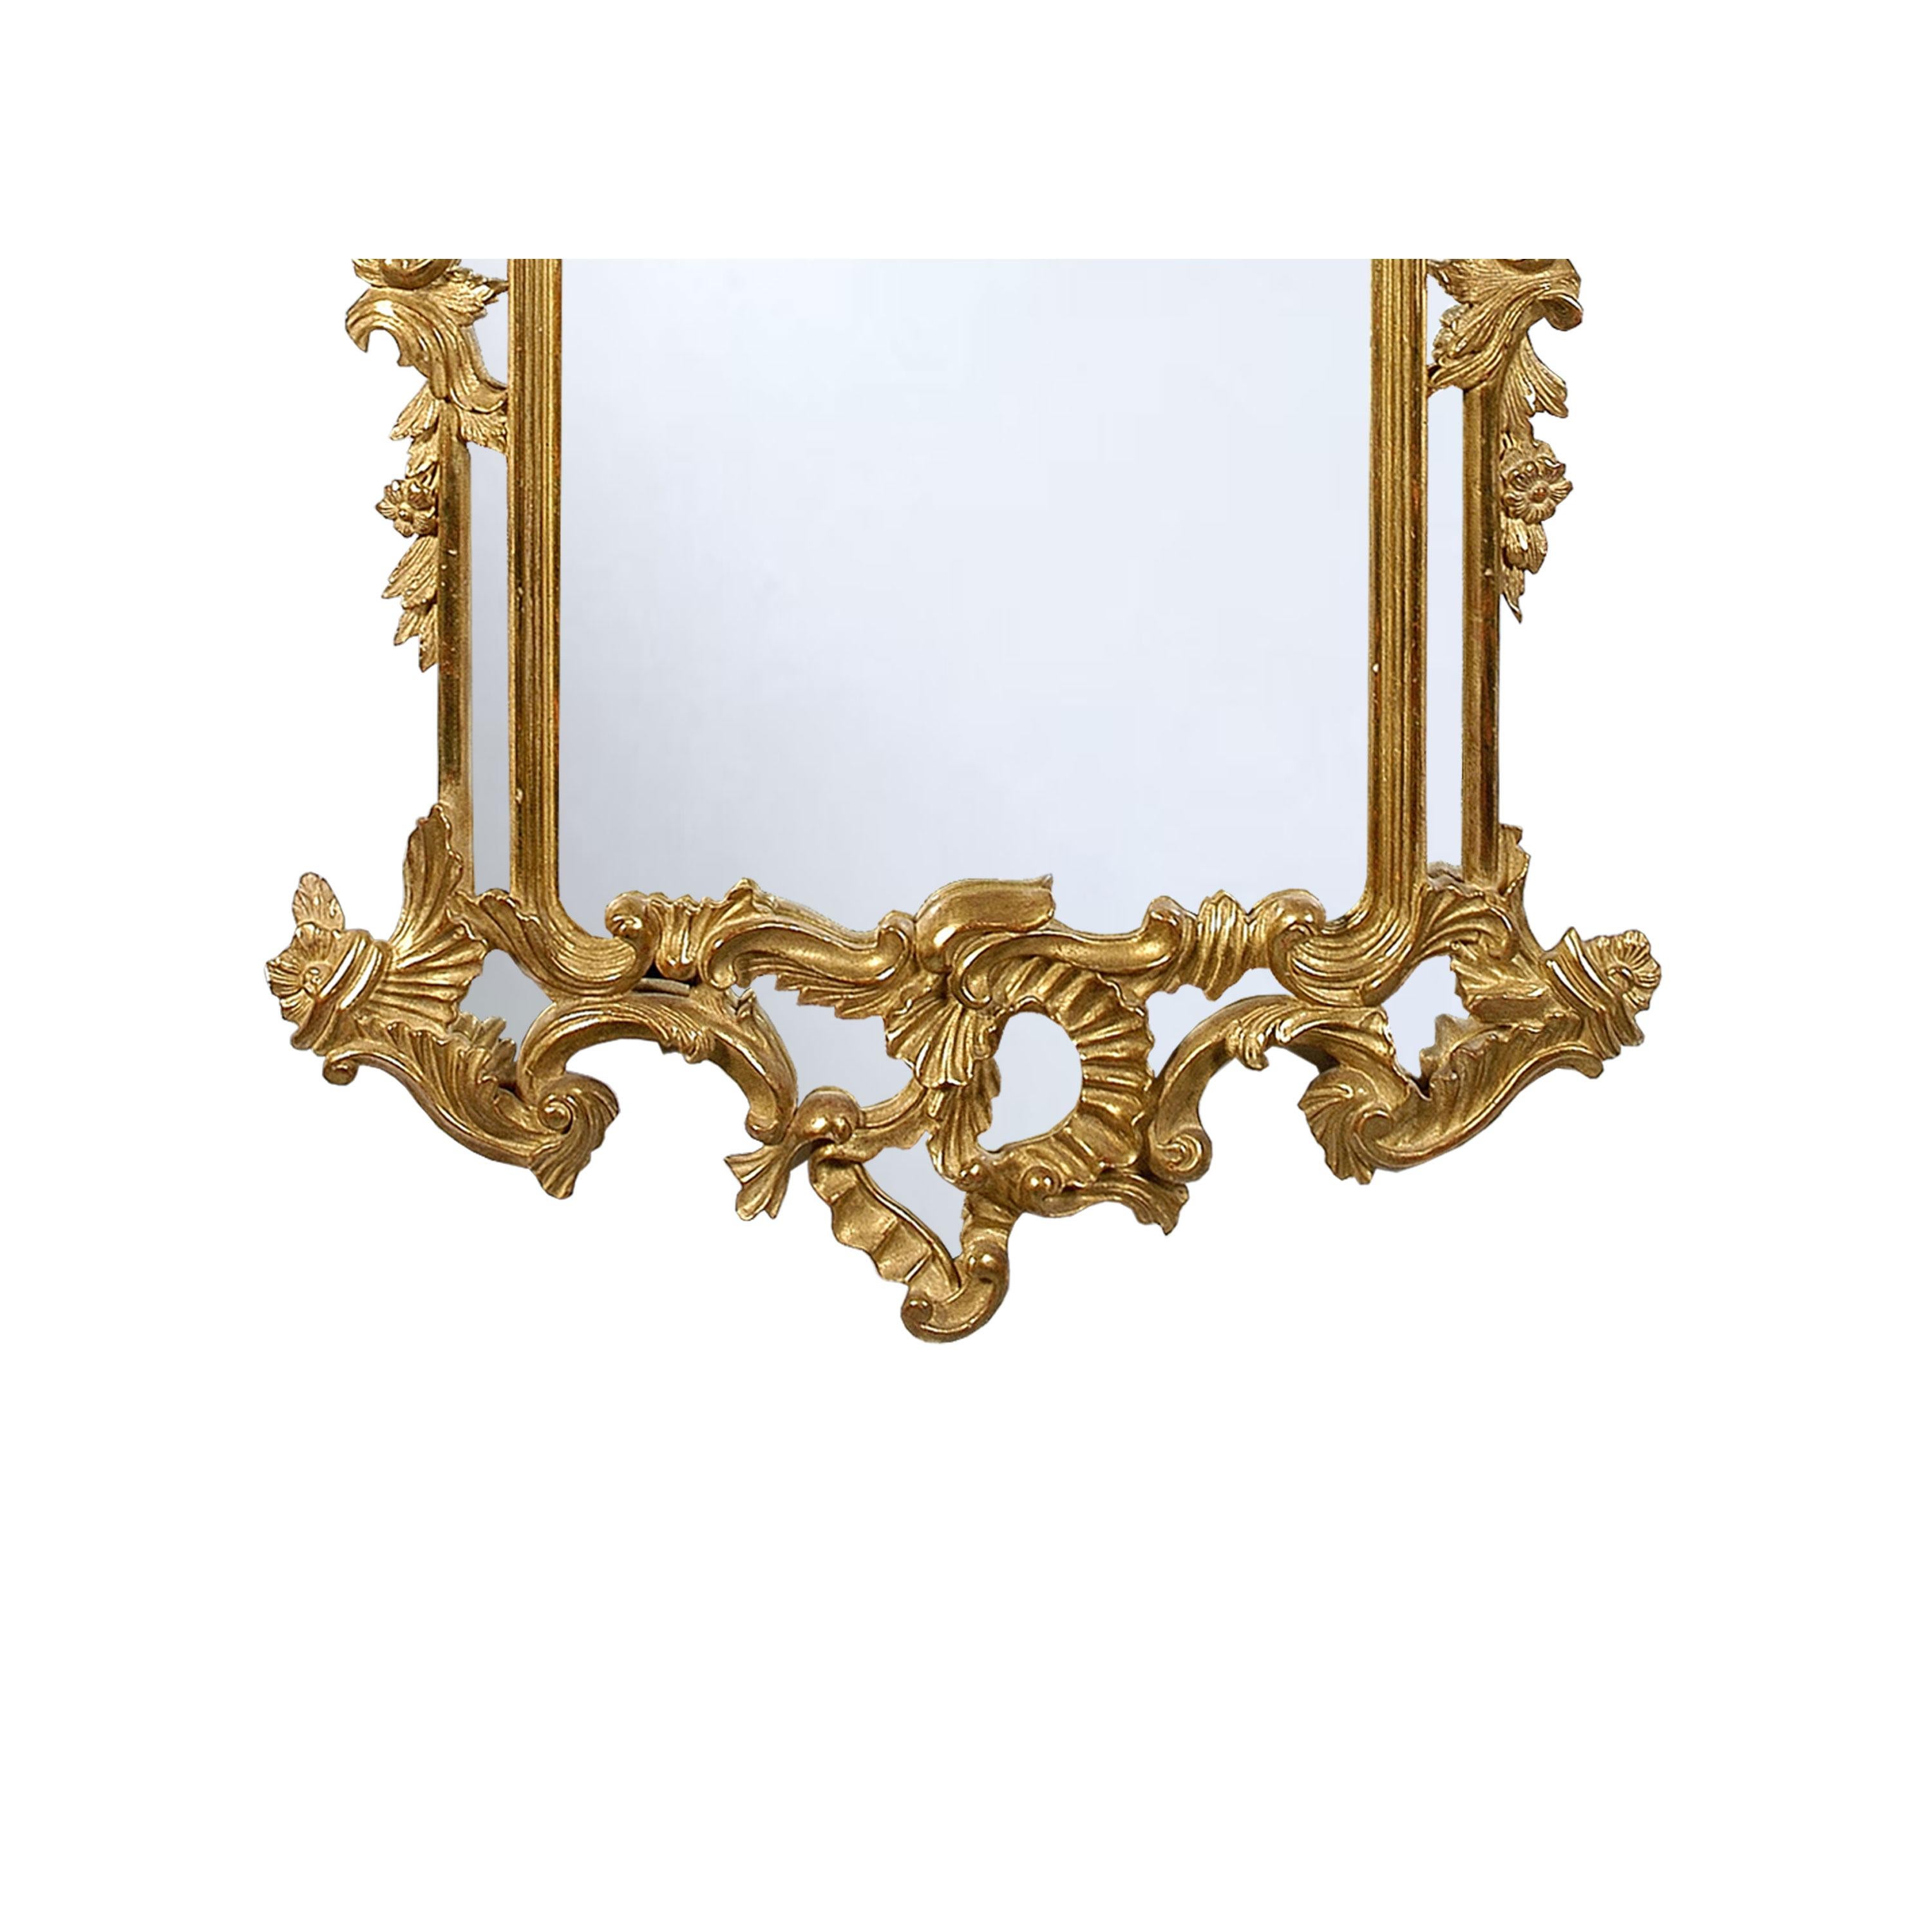 Spanish Neoclassical Regency Rectangular Gold Hand Carved Wooden Mirror For Sale